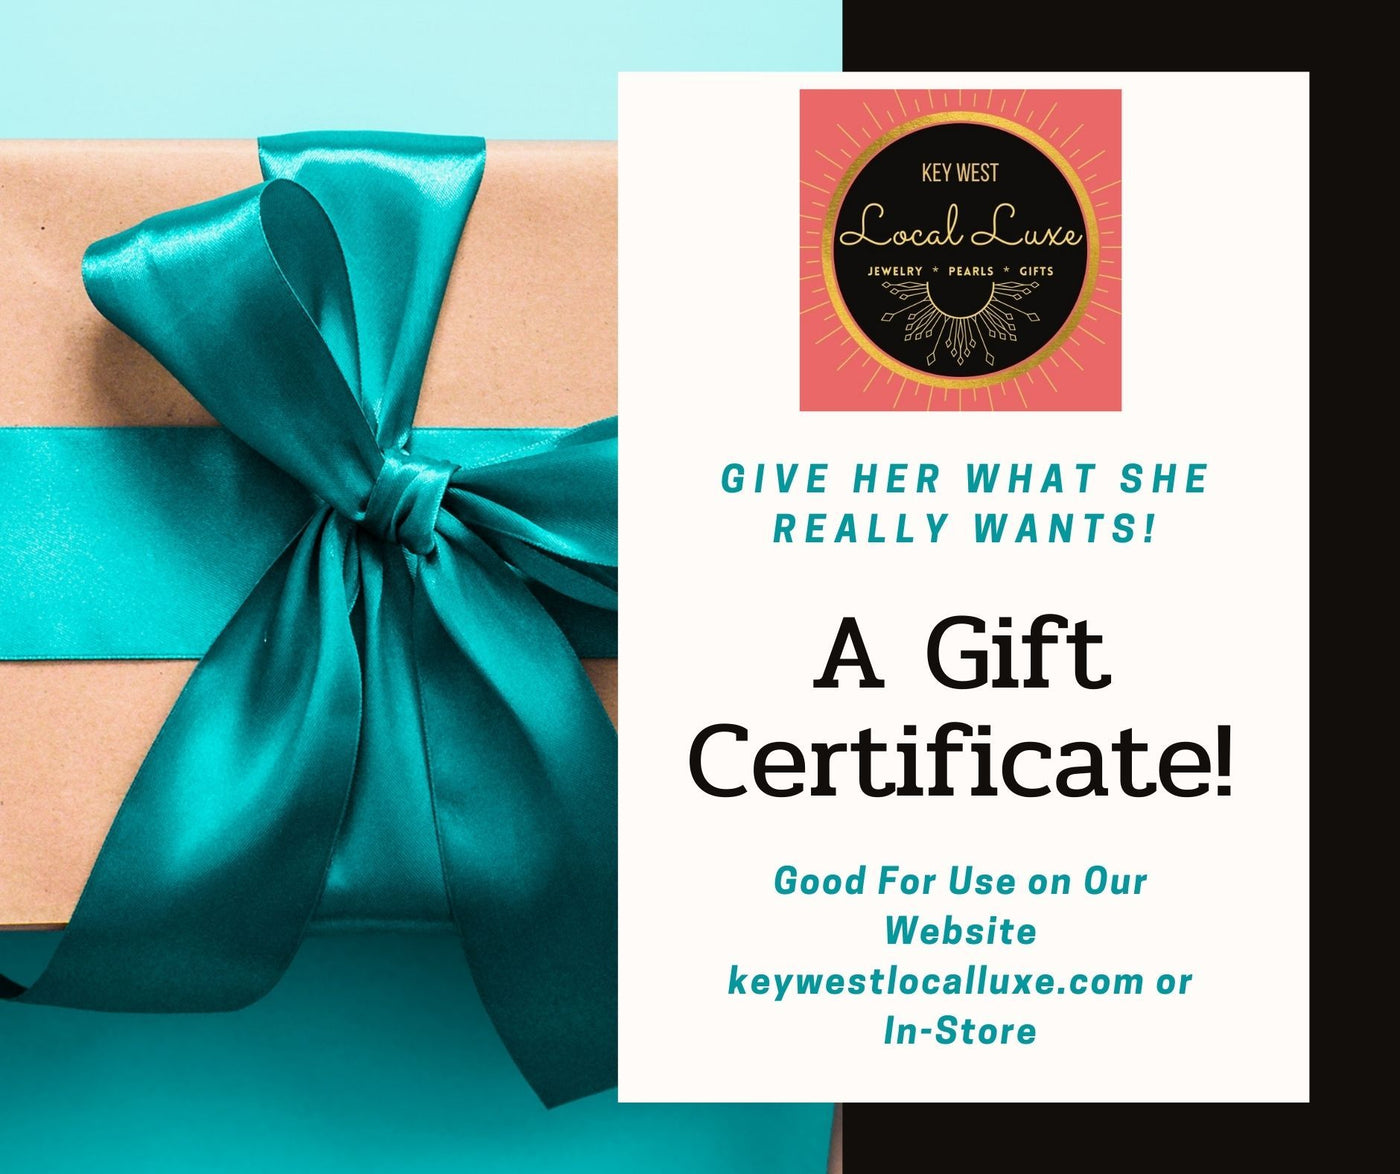 Gift Certificate $2000